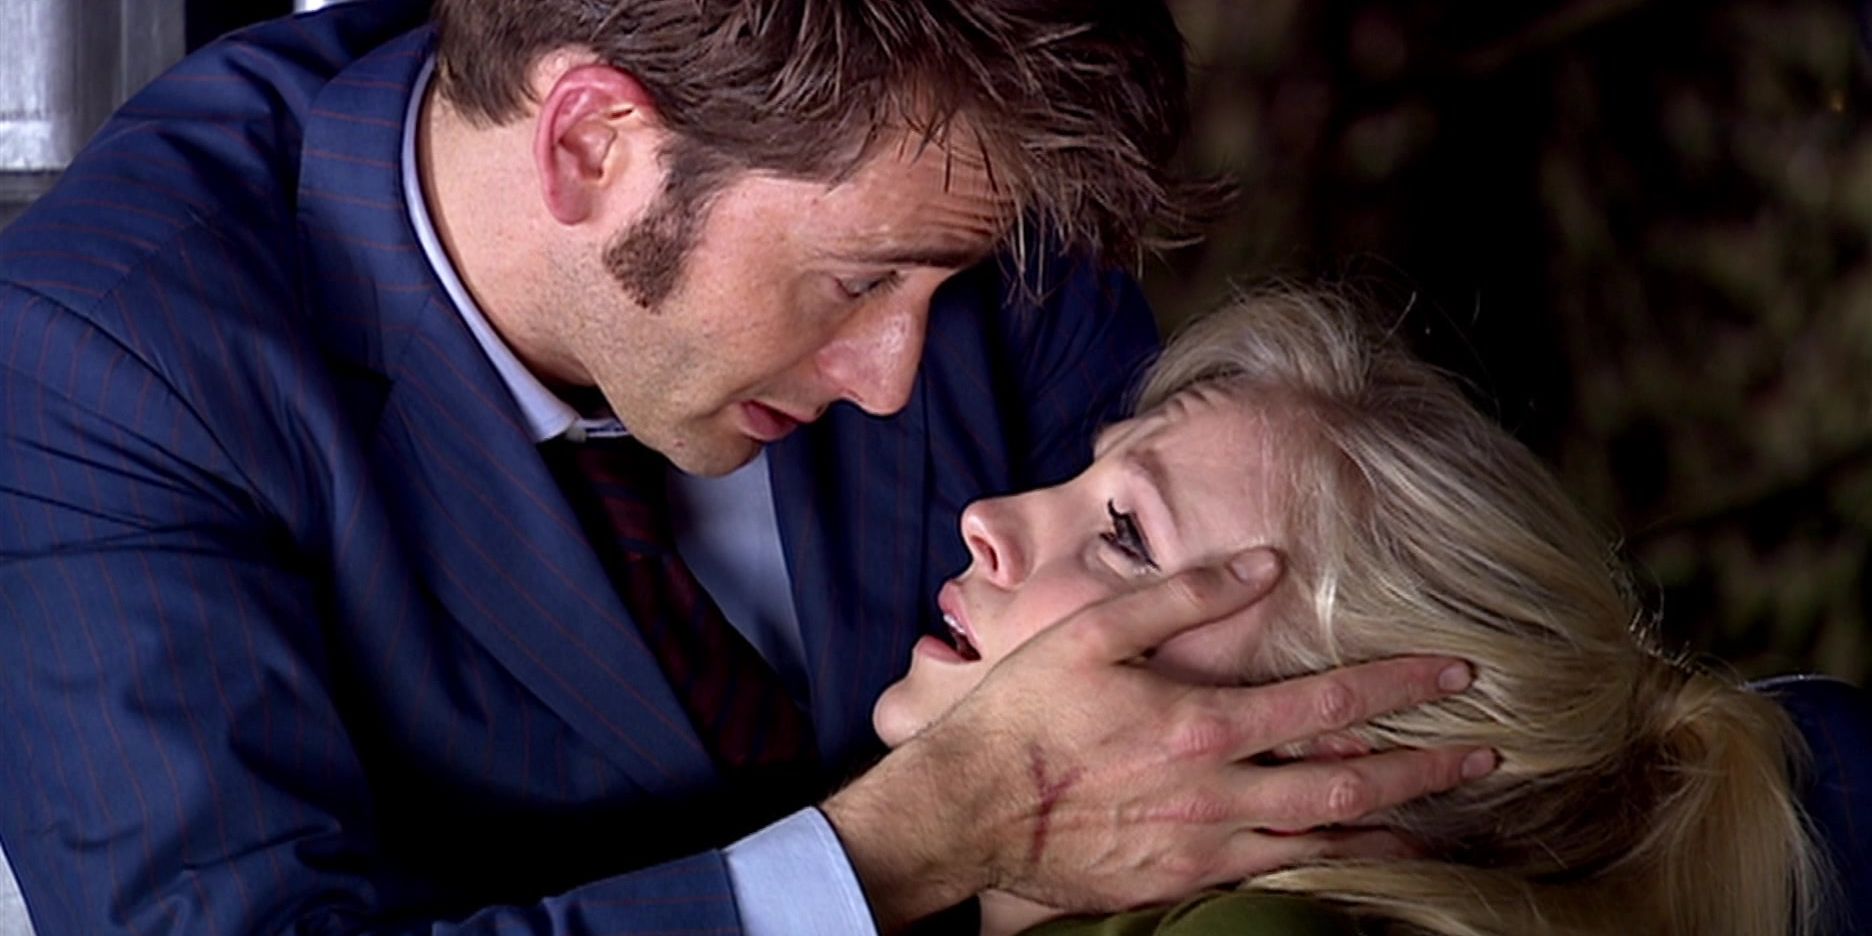 David Tennant as the Doctor and Georgia Moffett as Dying Jenny in Doctor Who "The Doctor's Daughter"